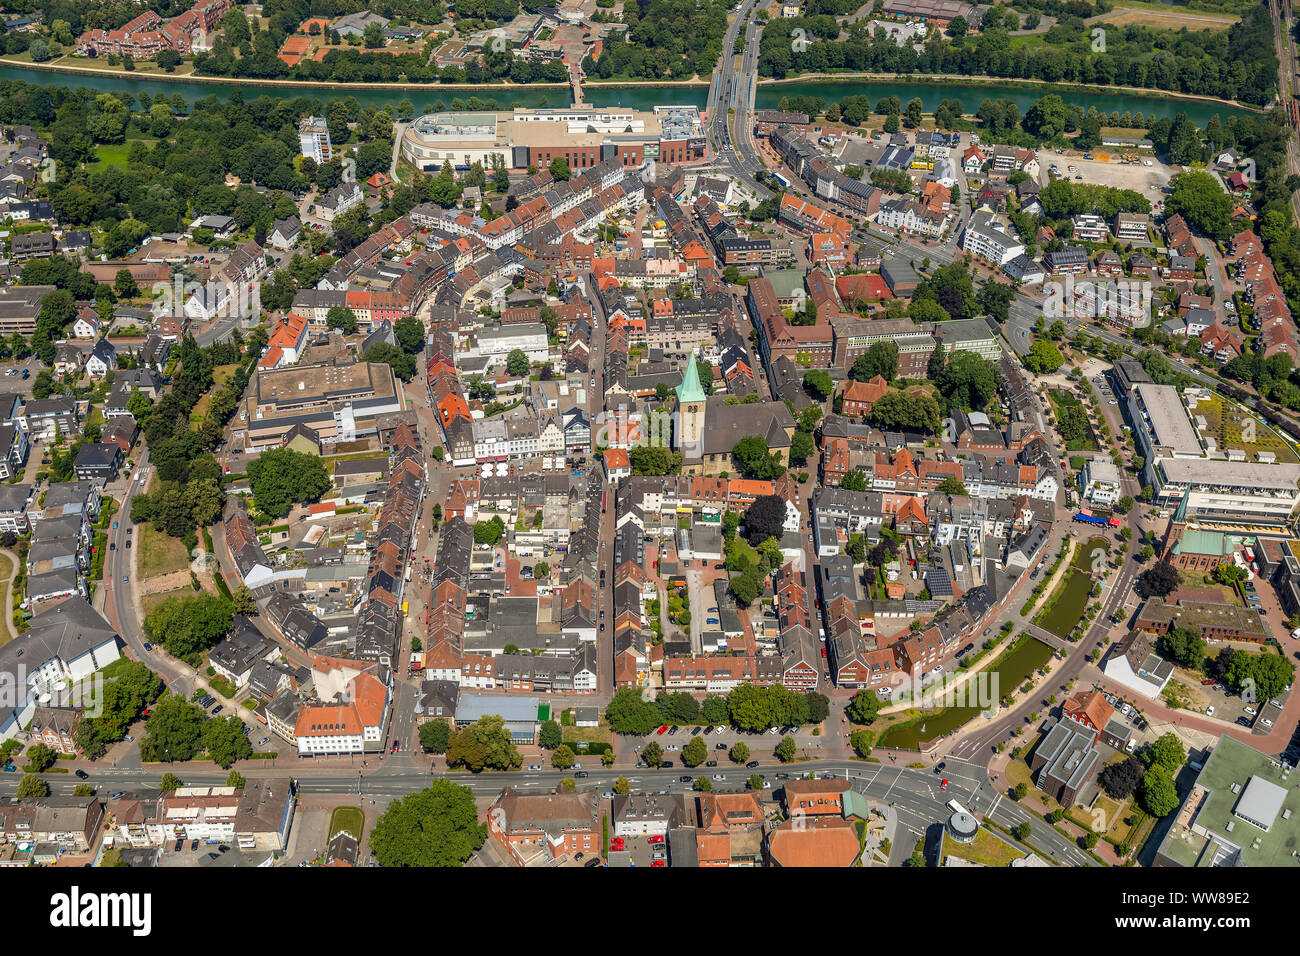 Overview of the Dorsten town center with Westwall, SÃ¼dwall, Ostwall, SÃ¼dgraben, Ostgraben and market square, view from the south, Dorsten, Ruhrgebiet, North Rhine-Westphalia, Germany Stock Photo